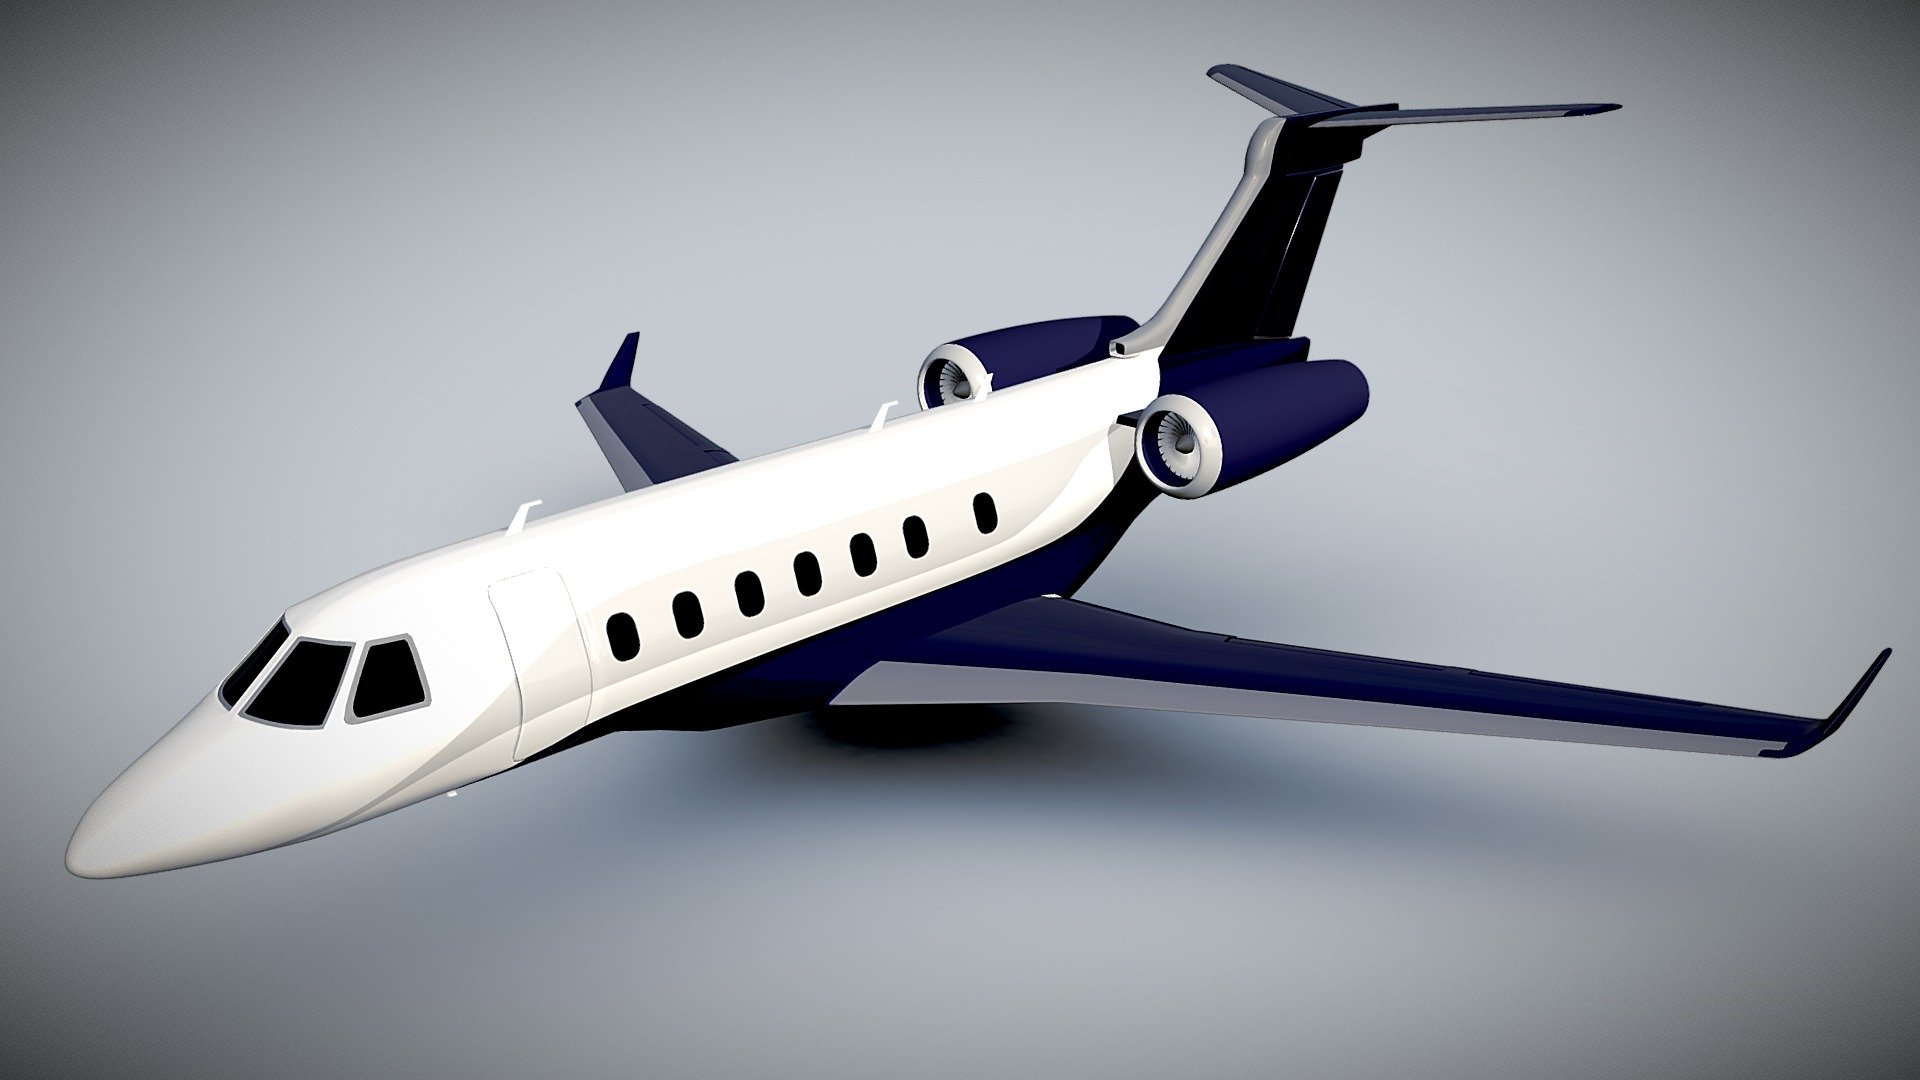 3d model created with blender3d 2.79 version.Renderings created with blender internal render.There is one texture both for fuselage and for engines 4188 x 4188 png with windows and stripes details.Doors created from polygons as propellers too.There are no interior objects and no landing gears for this product.Elevators and rudder detached but not rigged.Objects detached named by object and by material.Enjoy my product : )

3ds file
verts: 128544
polys: 42848

obj file
verts: 28900
polys: 42848 - Embraer Legacy 500 private jet - Buy Royalty Free 3D model by koleos3d 3d model